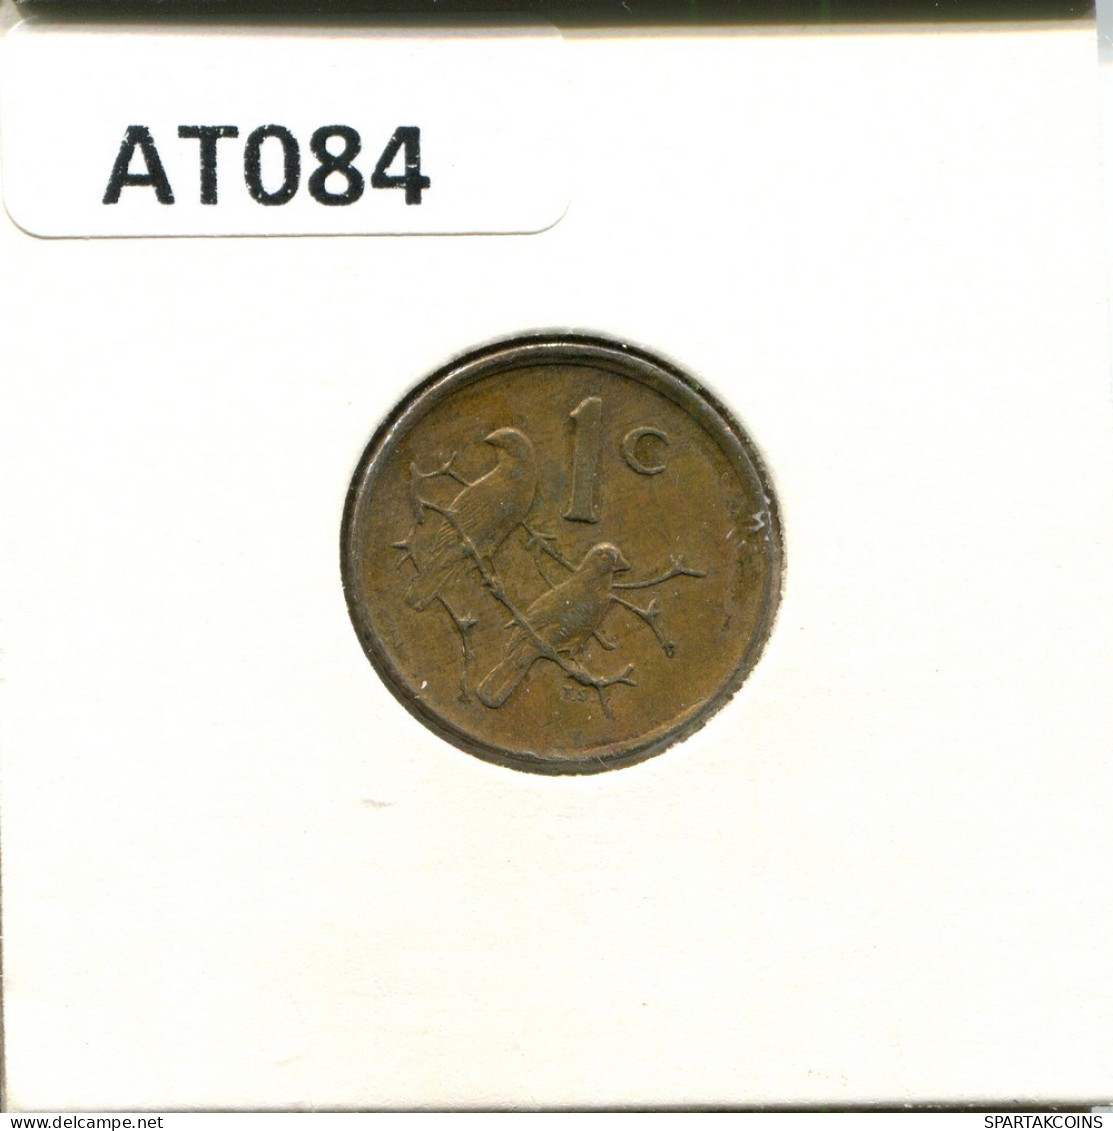 1 CENT 1983 SOUTH AFRICA Coin #AT084.U.A - South Africa